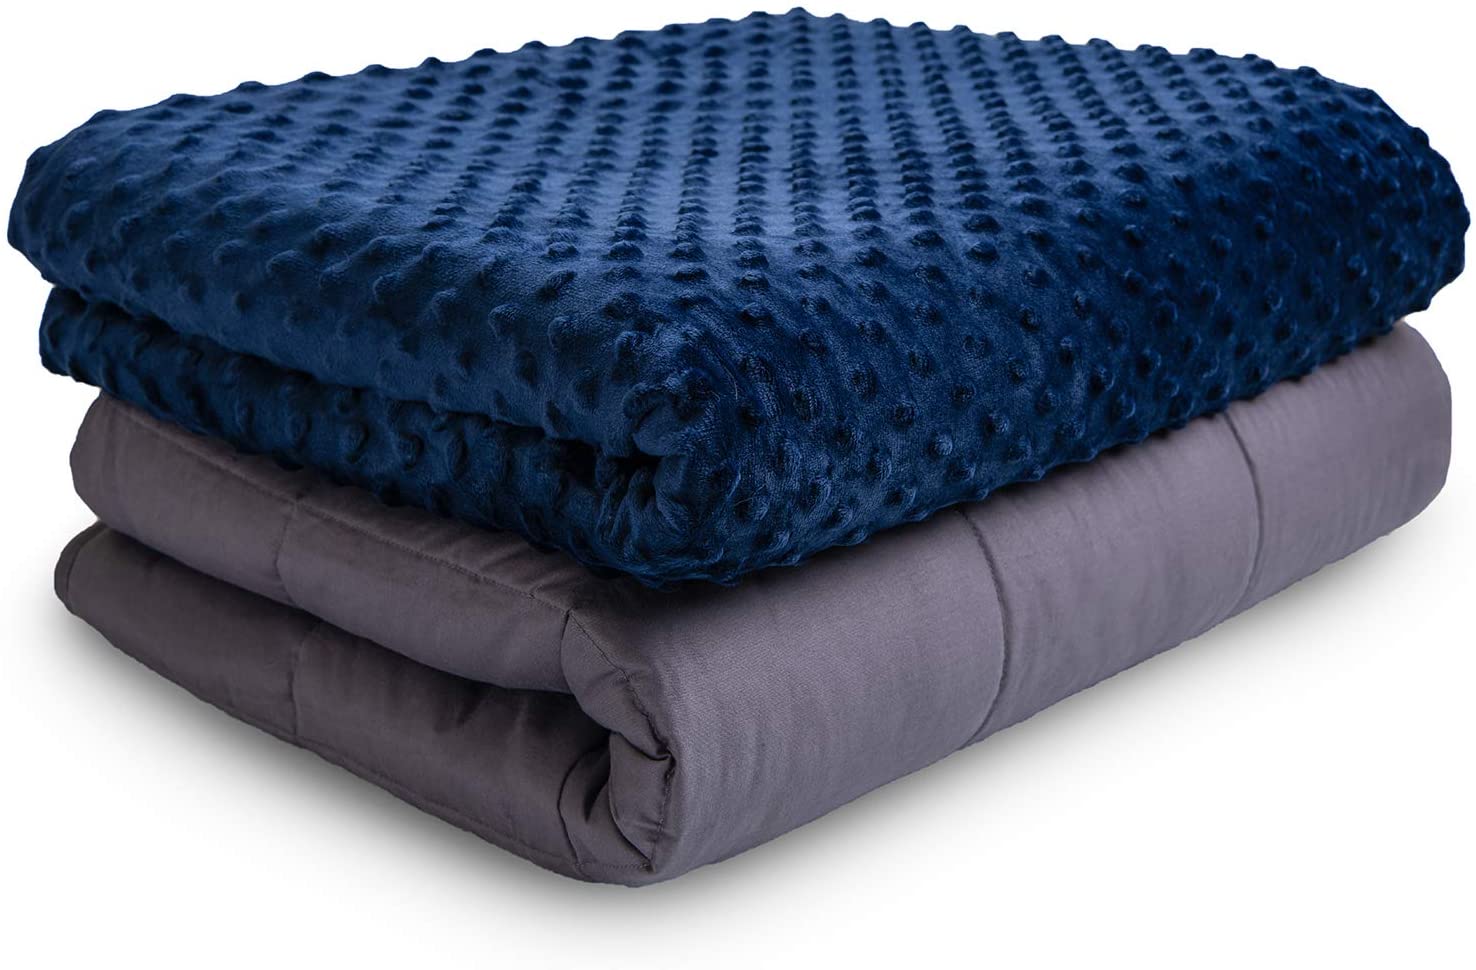 Weighted Blanket & Soft removable cover. 122cm x 183cm (48" x 72") in